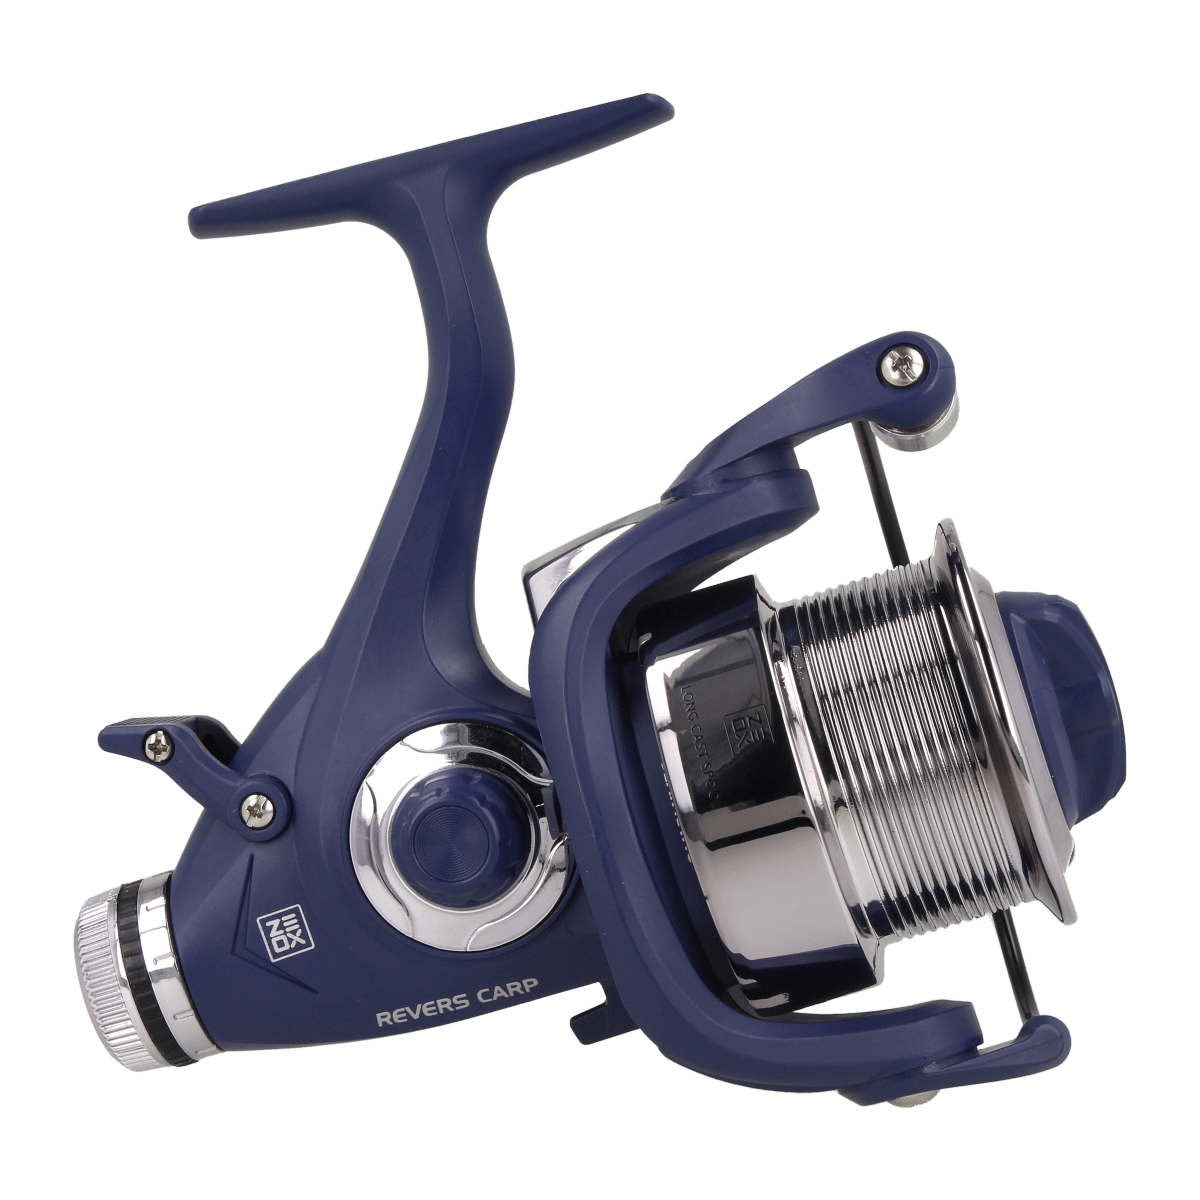 ZEOX Reel Revers Carp BR Long Cast: check it out on the official